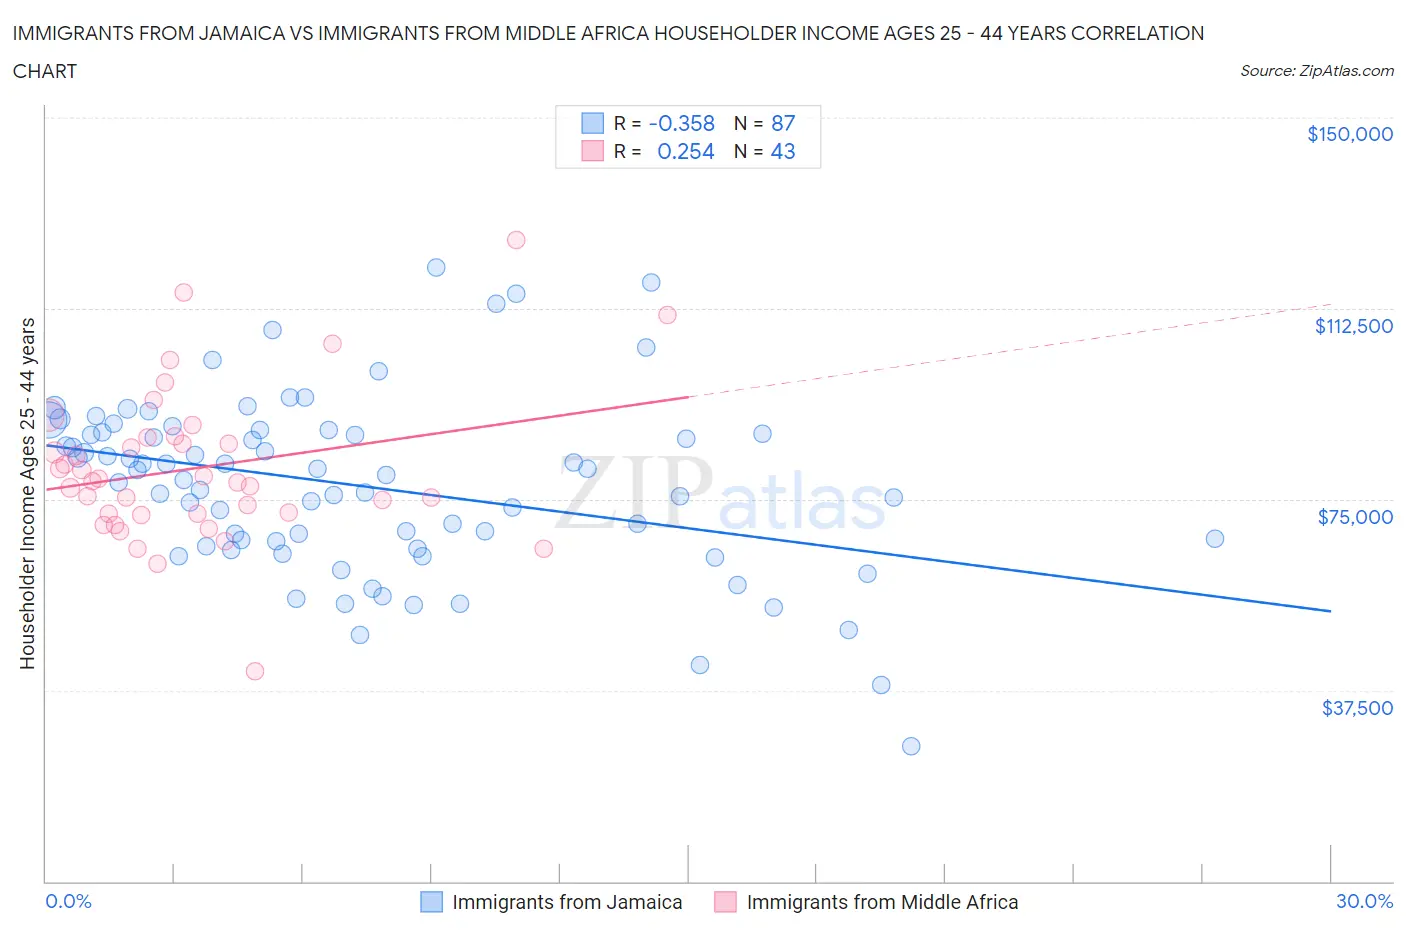 Immigrants from Jamaica vs Immigrants from Middle Africa Householder Income Ages 25 - 44 years